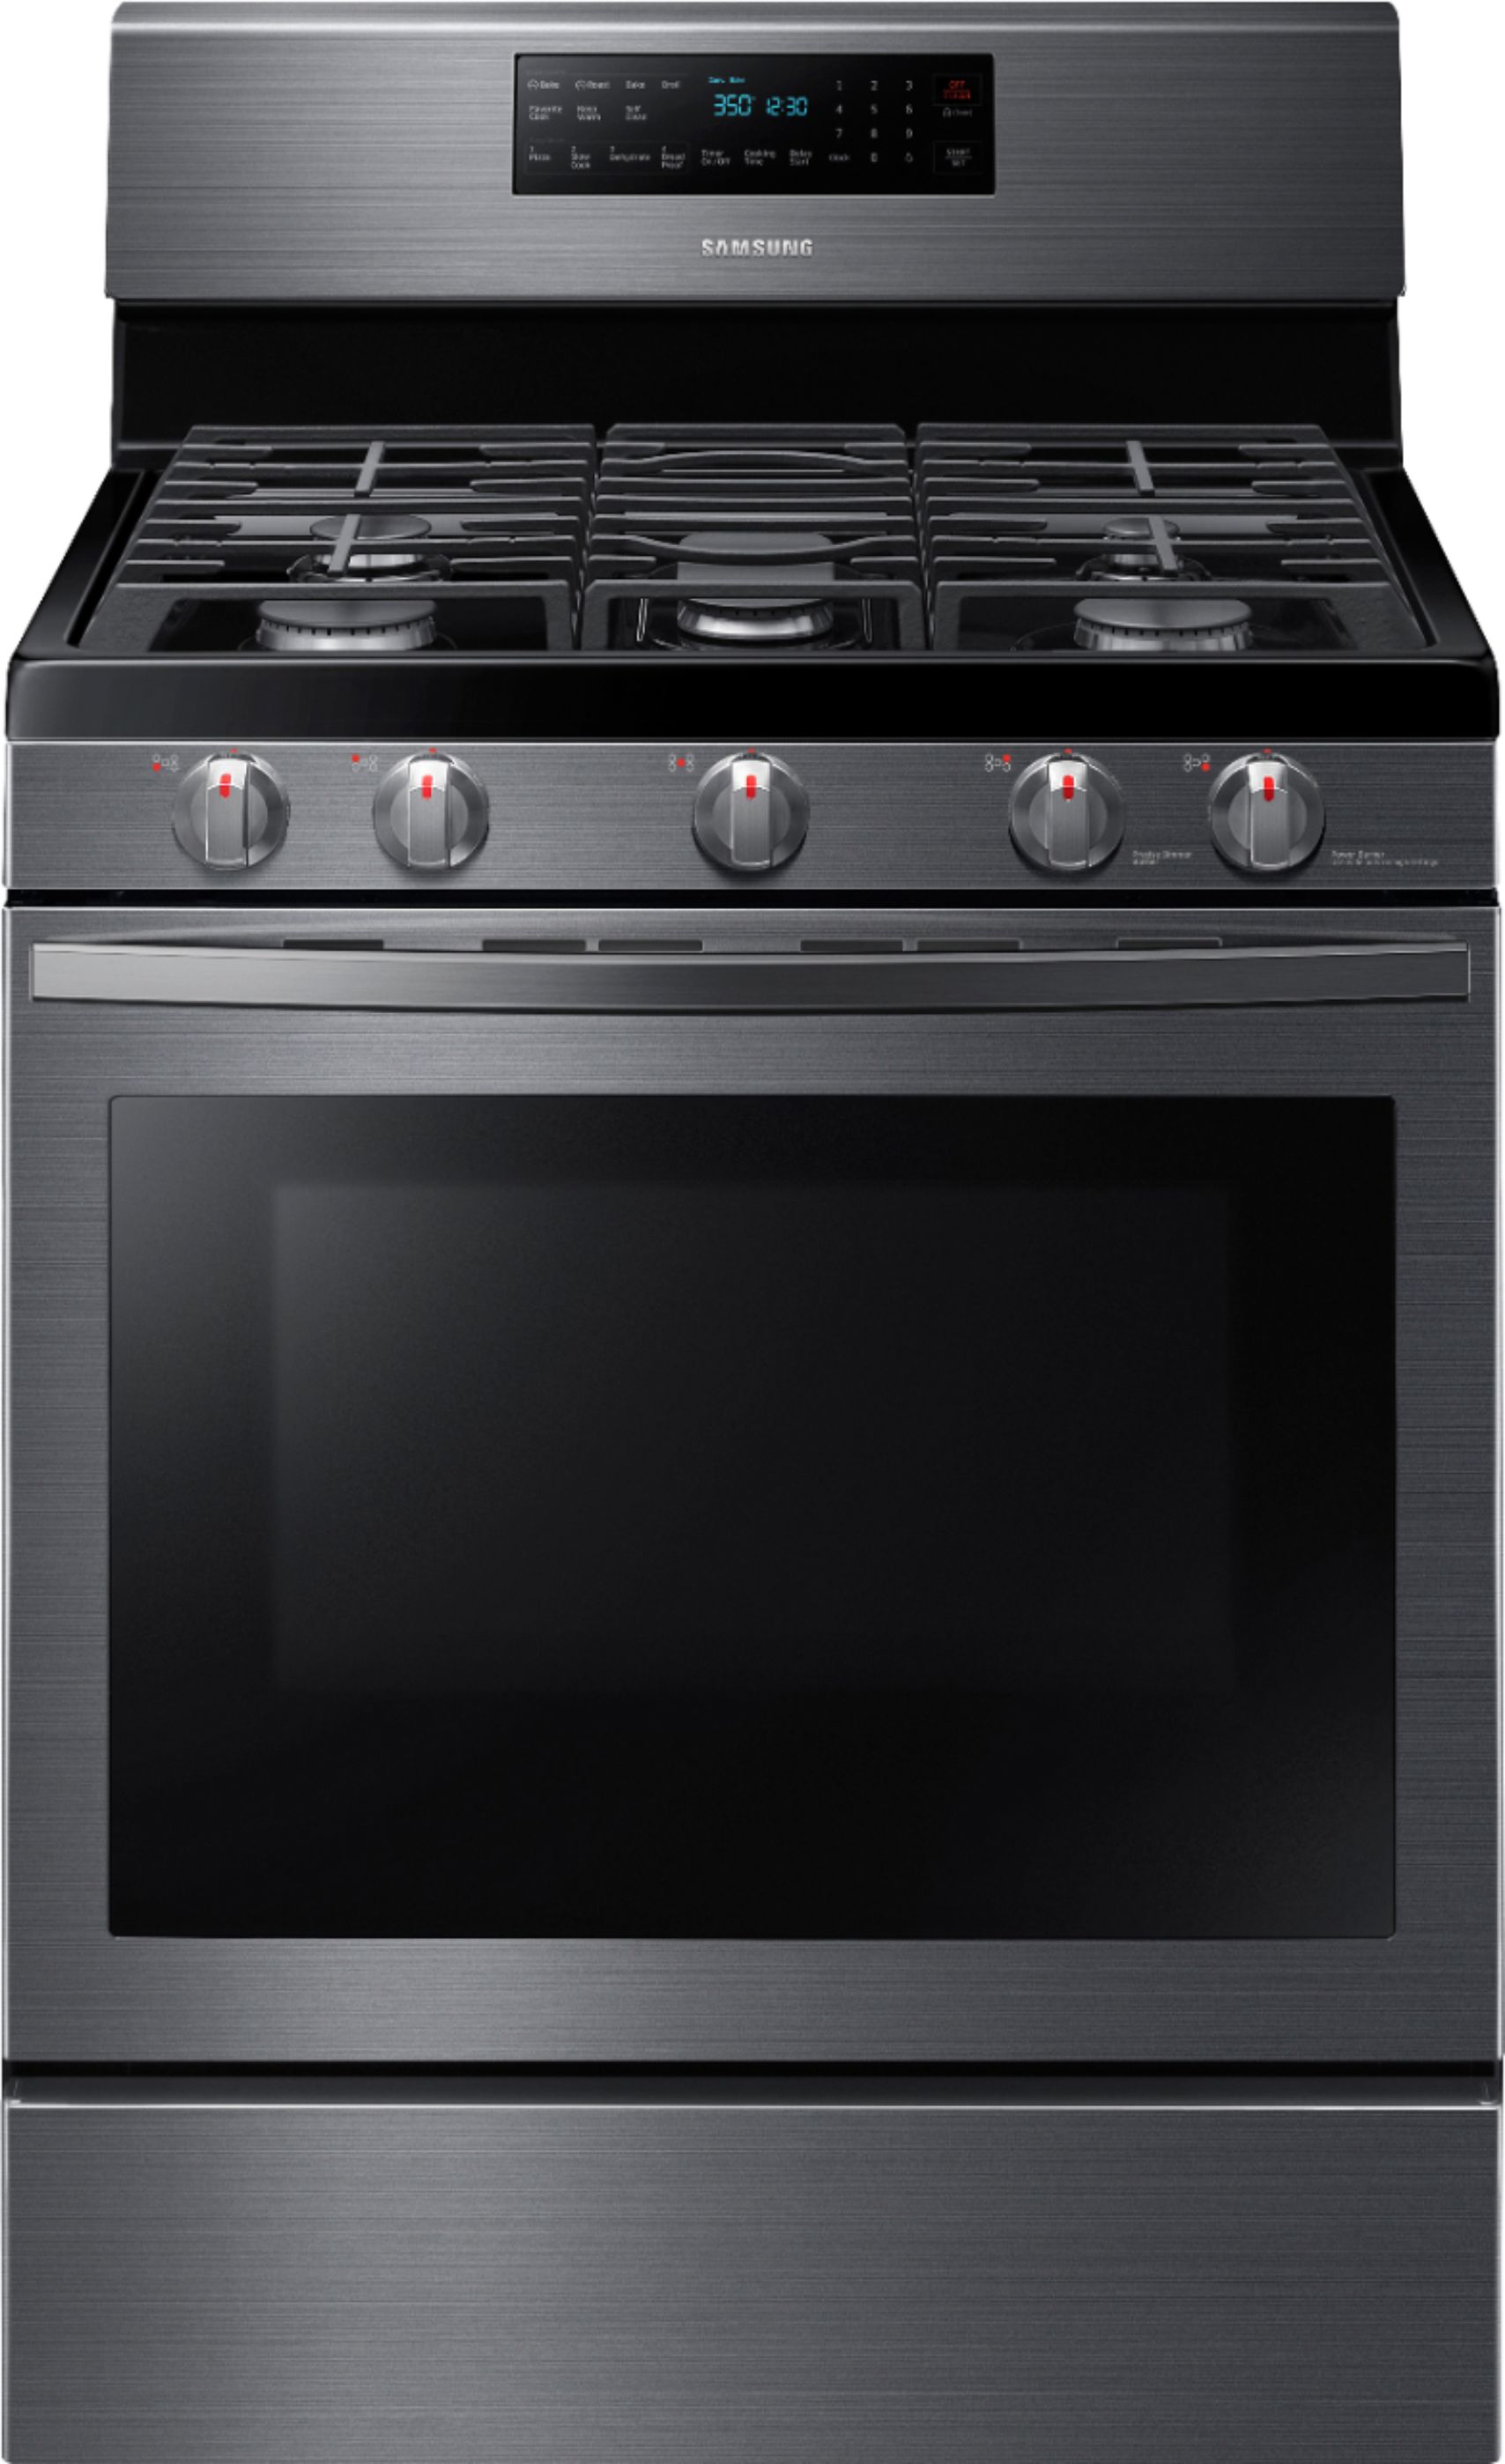 Samsung – 5.8 Cu. Ft. Freestanding Gas Convection Range with Self-High Heat Cleaning – Black stainless steel